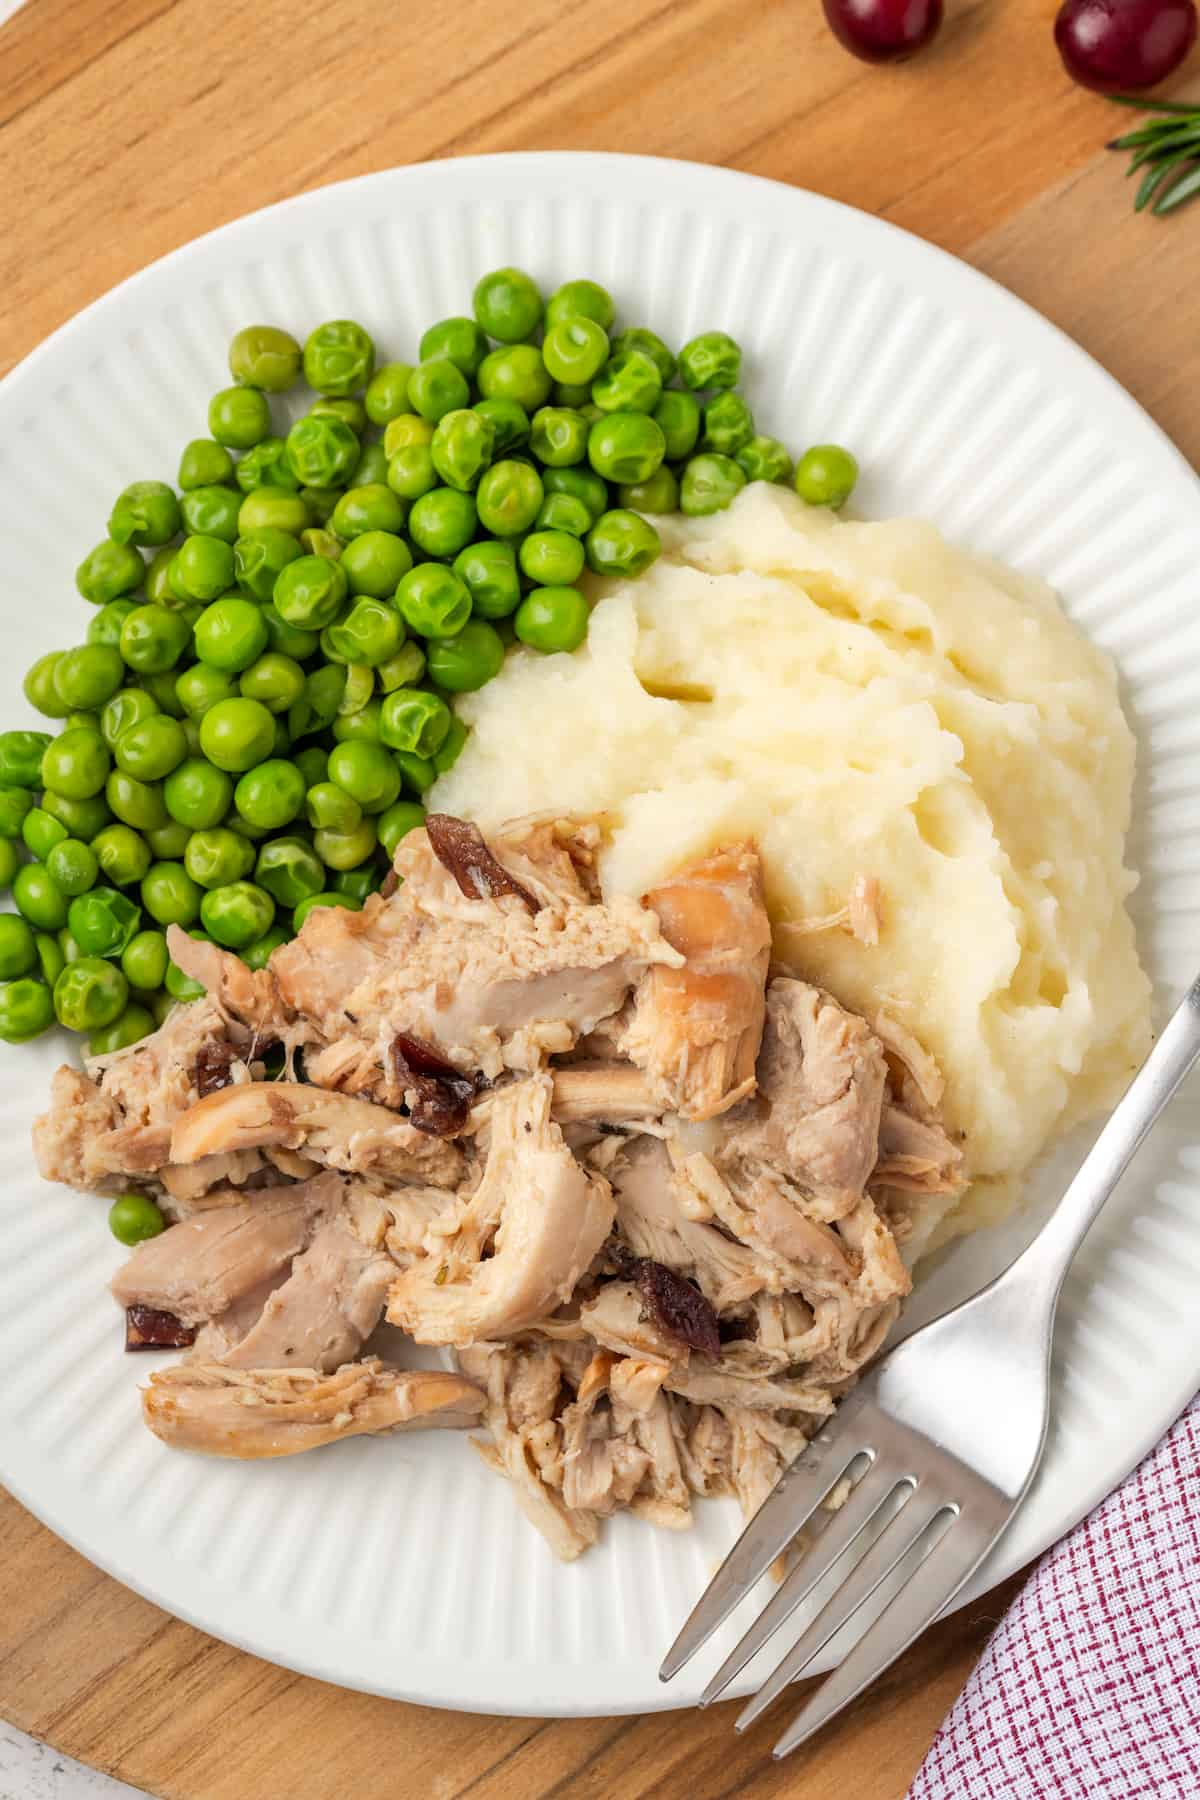 Cranberry Dijon chicken served alongside mashed potatoes and peas on a white dinner plate with a fork resting to the side.